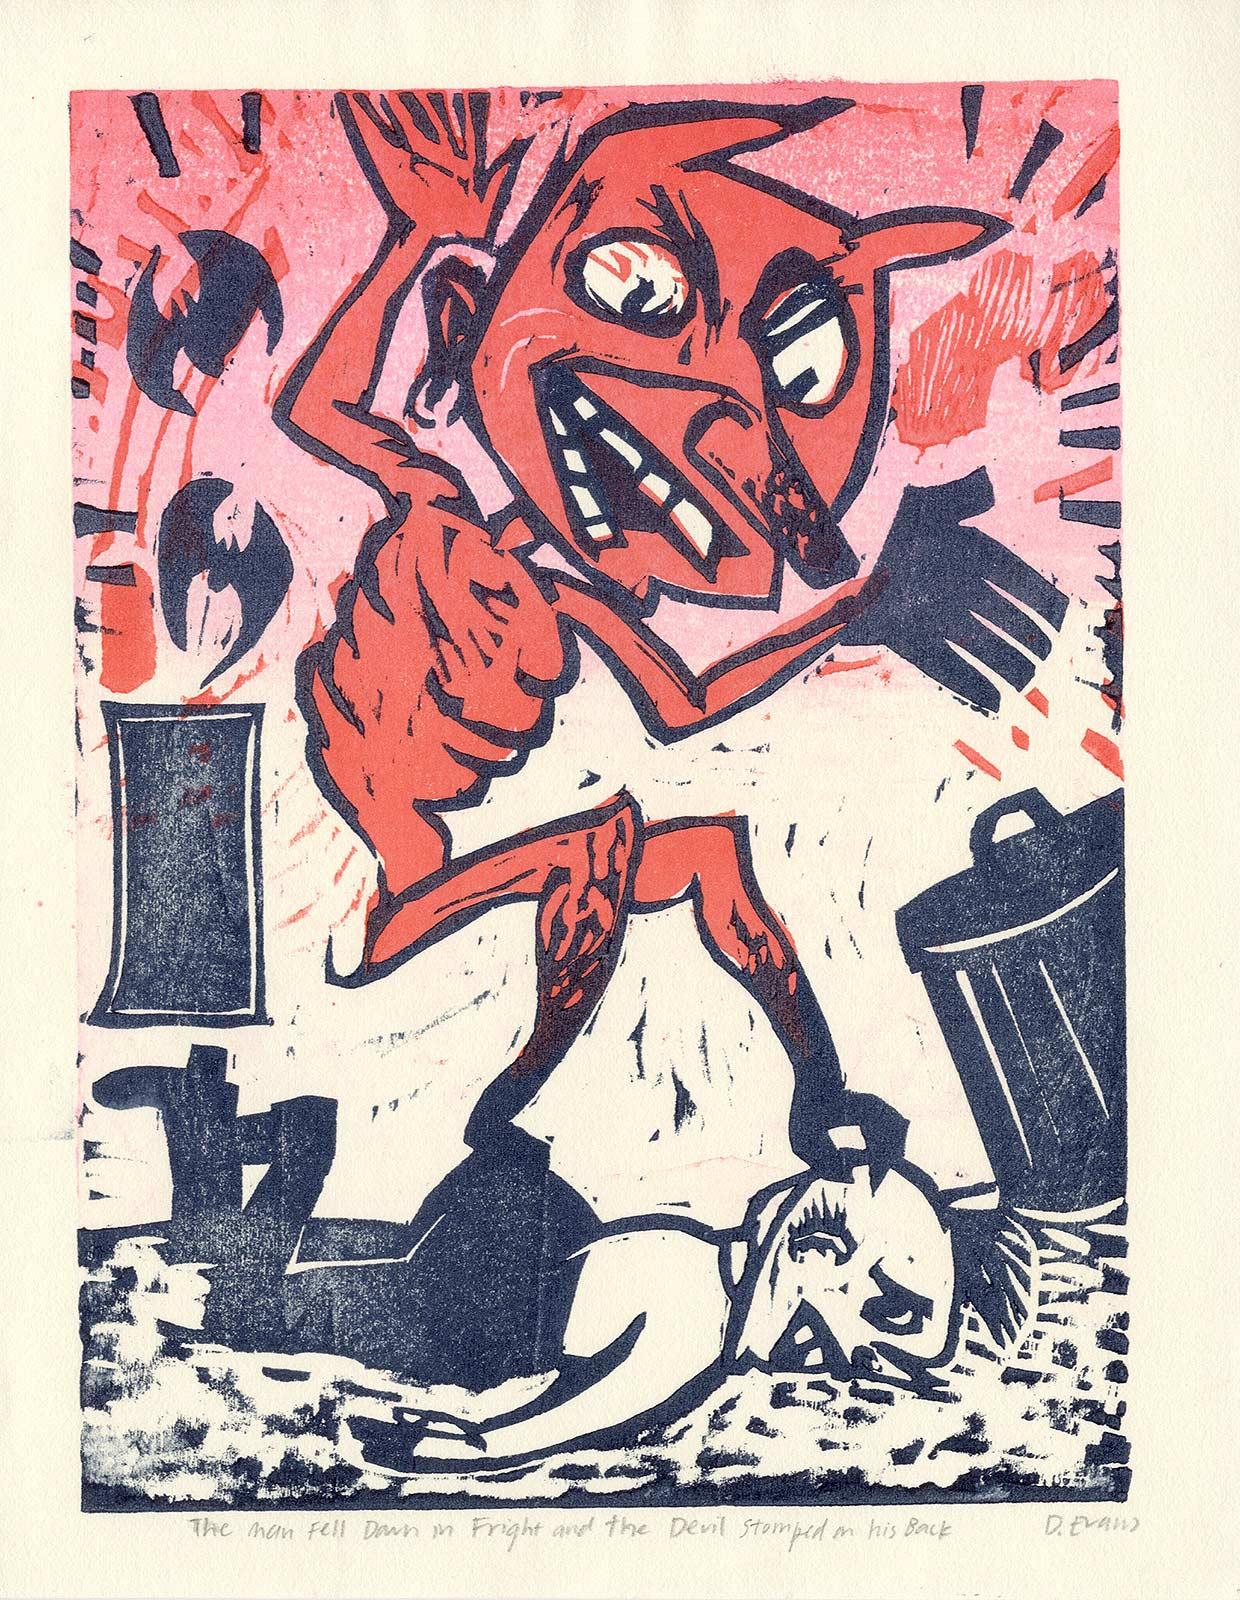 Man Fell Down in Fright and Devil Stomped on his Back - Pink Figurative Print by Donna Evans